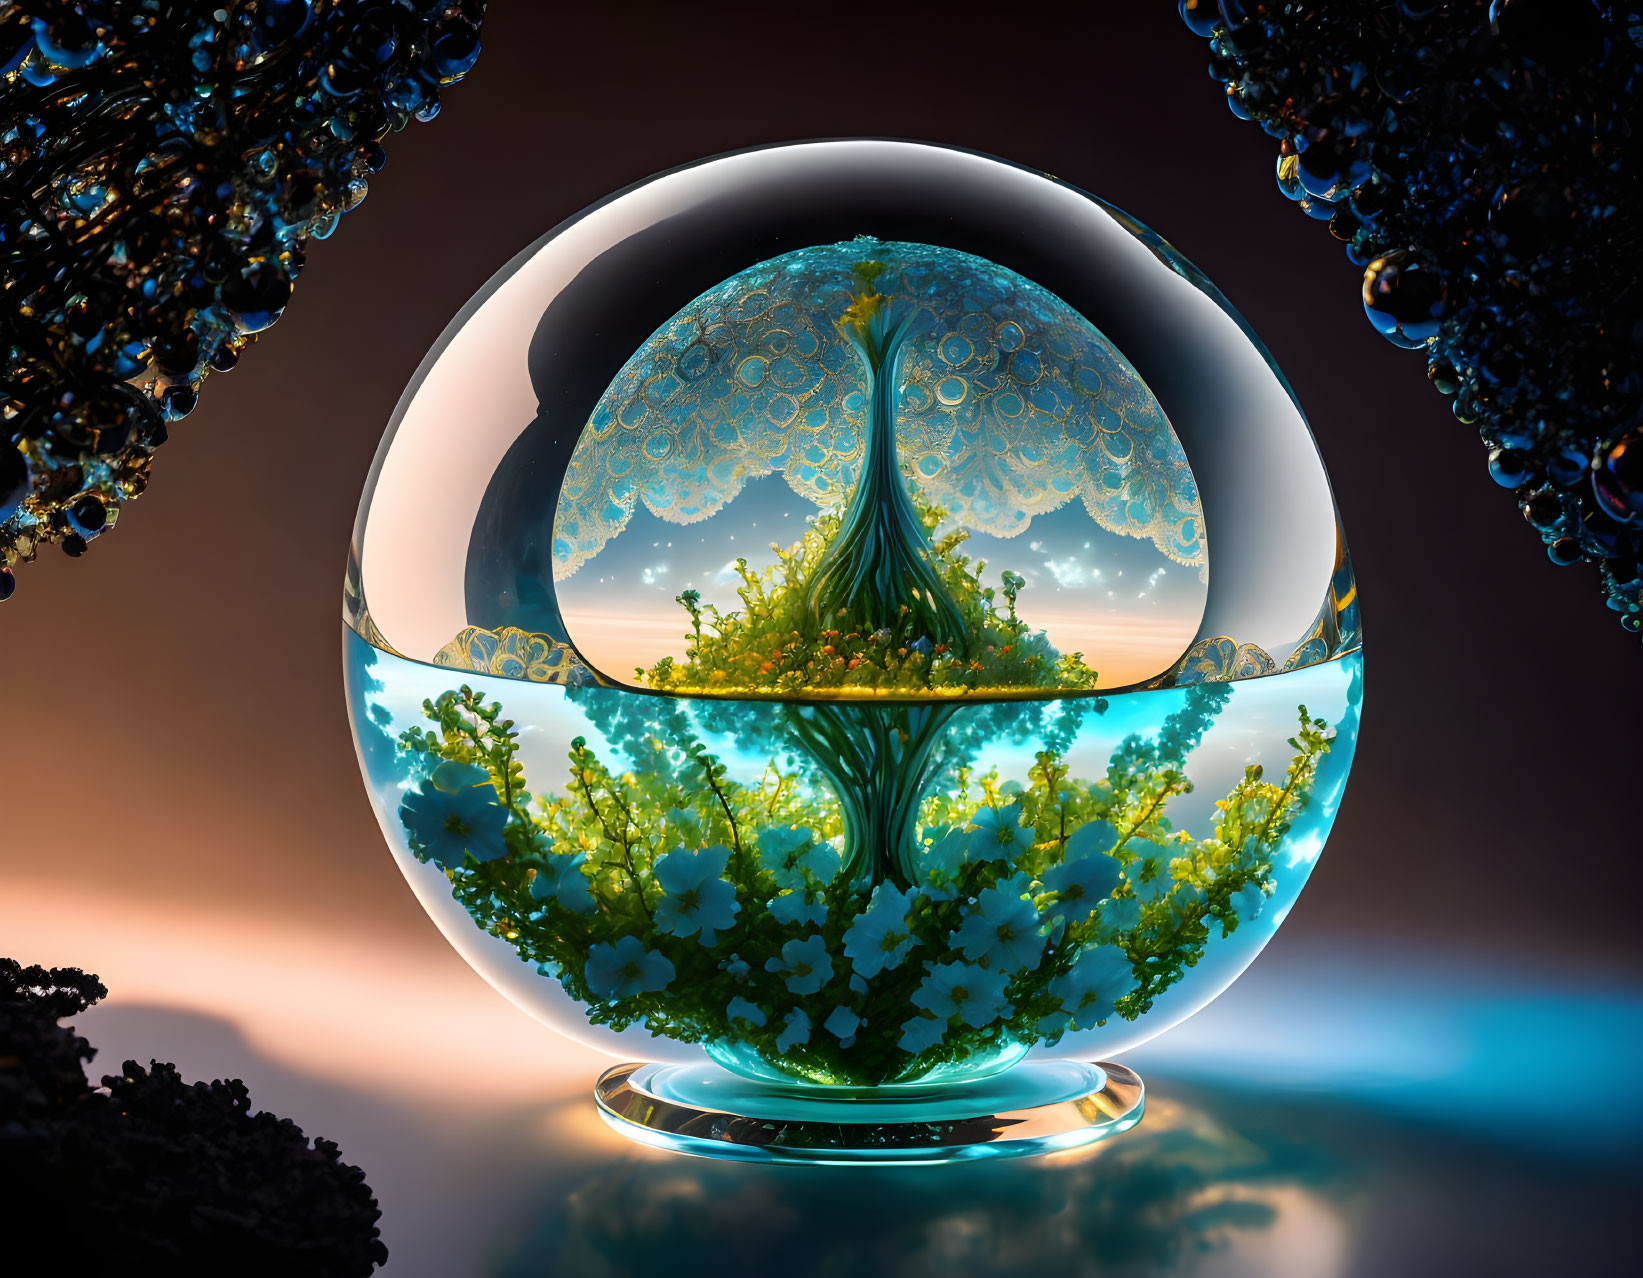 Surreal glass orb with illuminated miniature tree and floral ecosystem